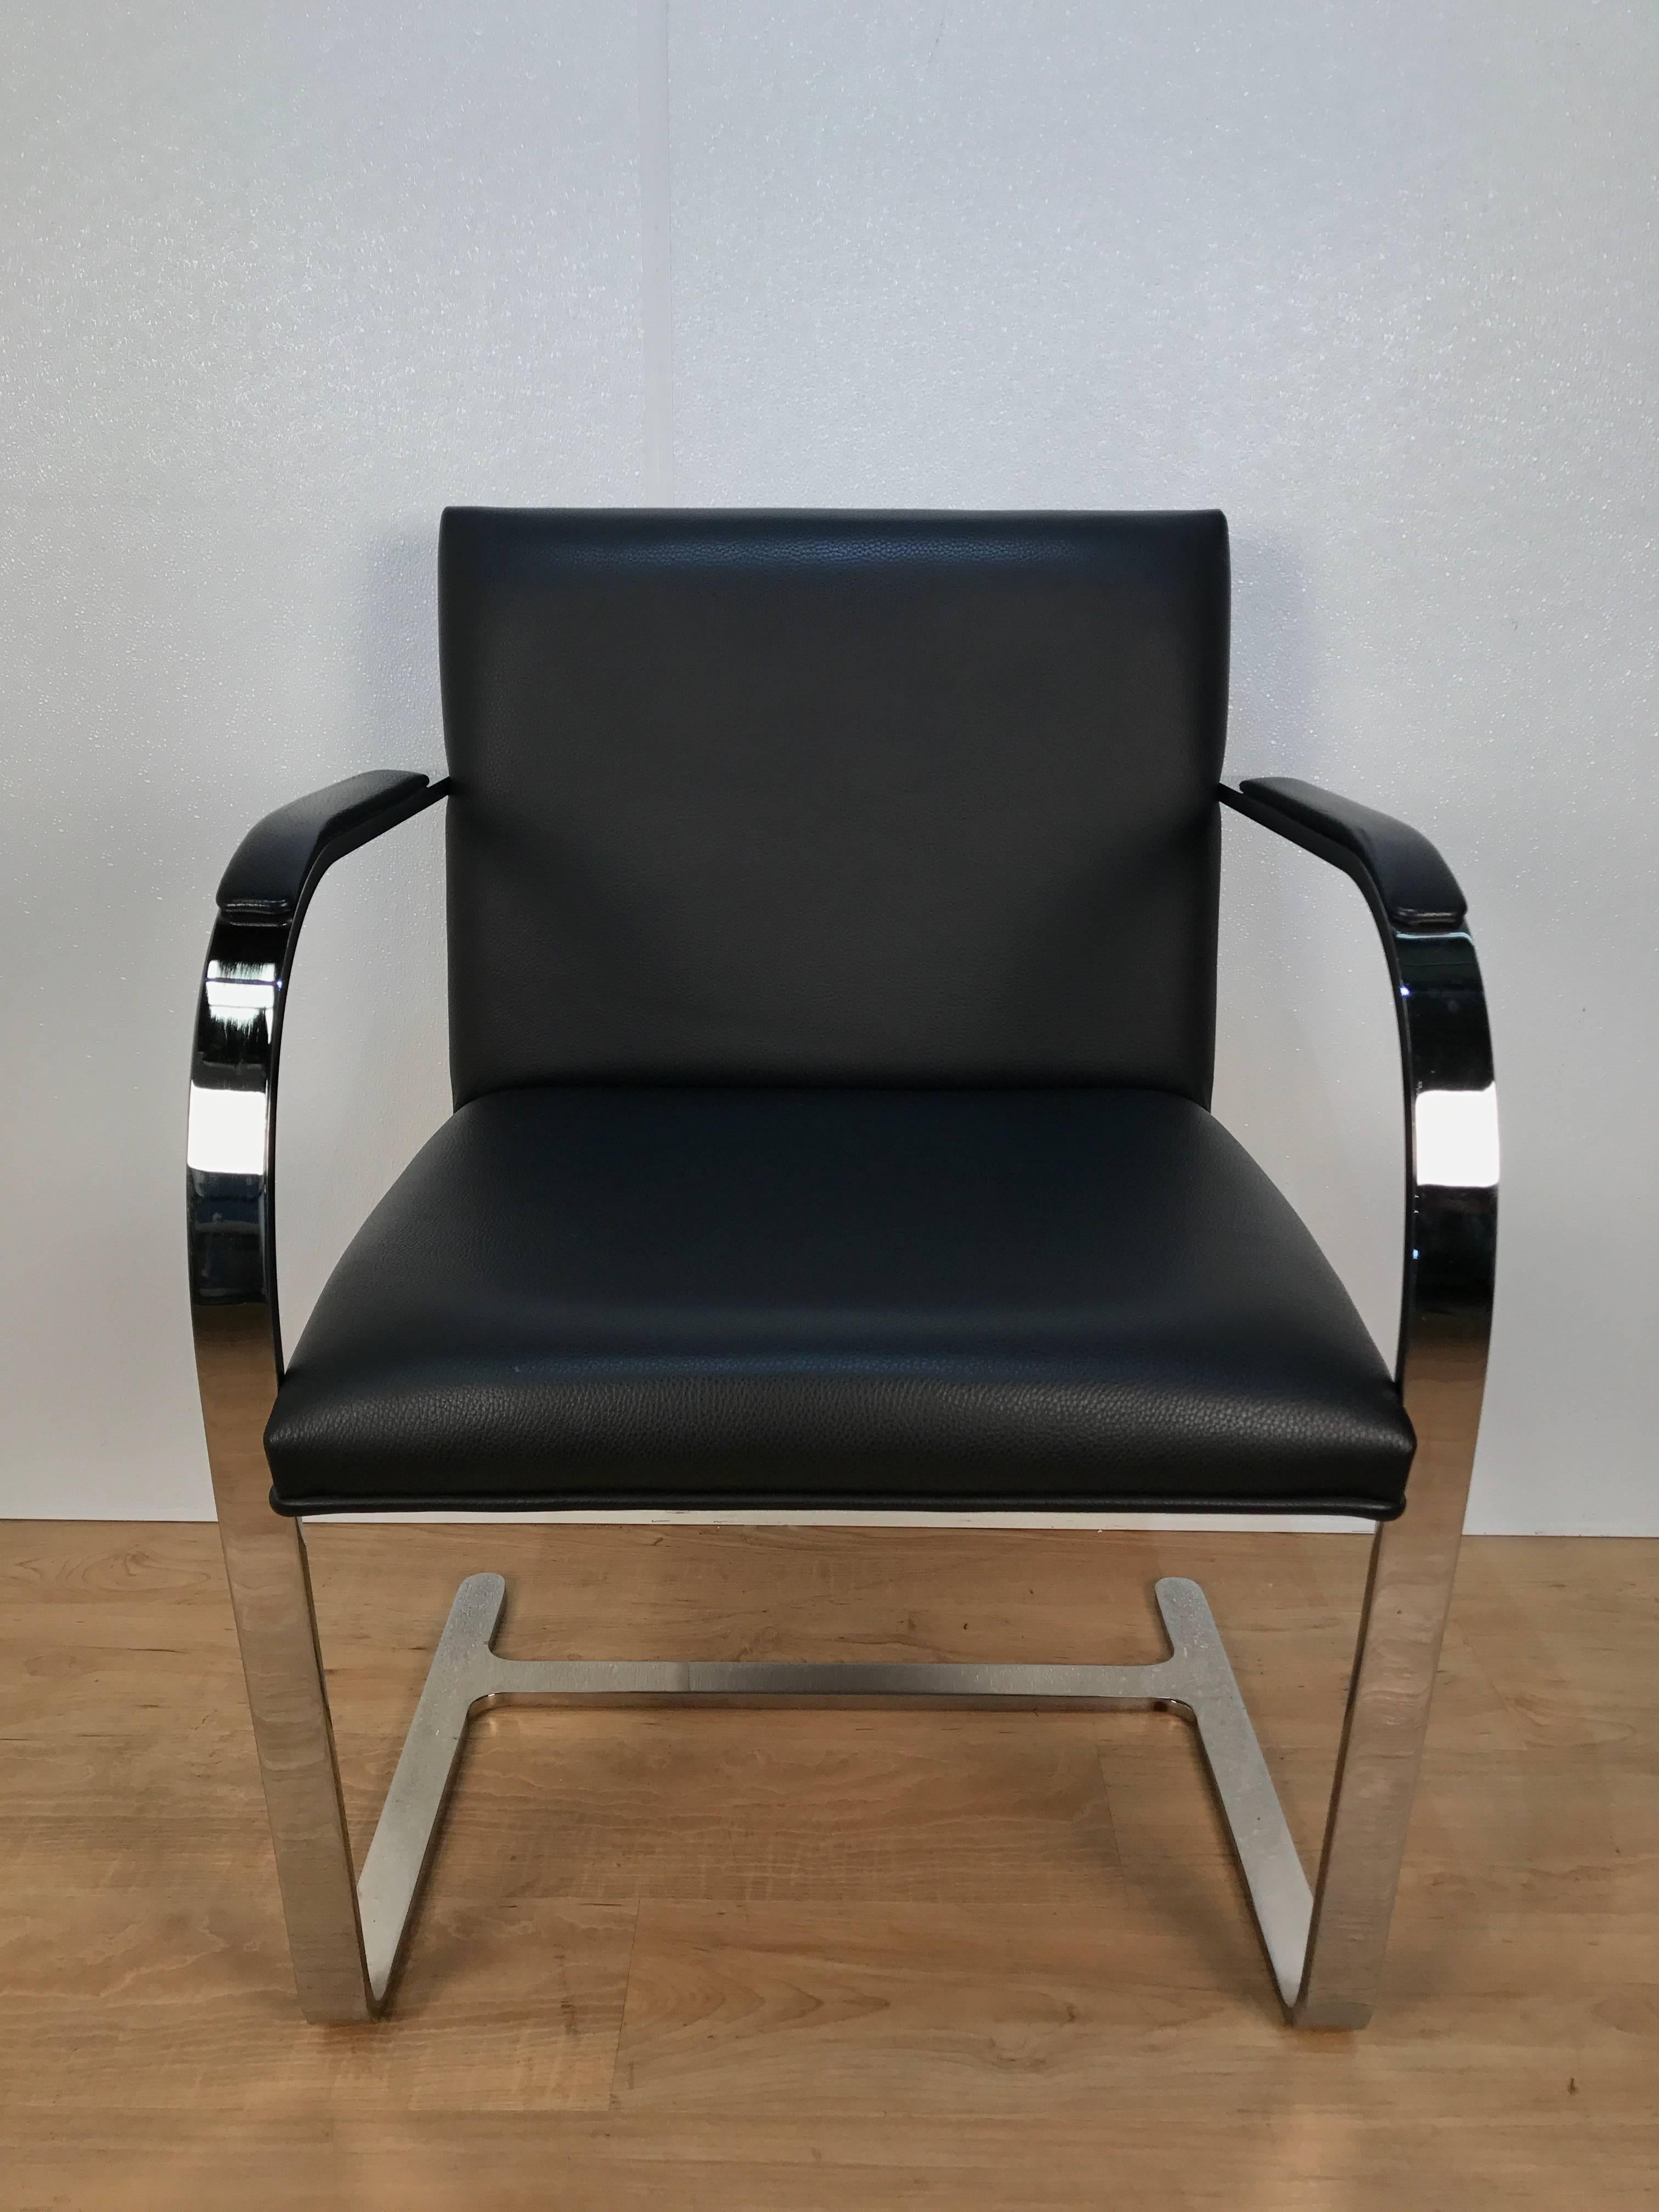 Excellent set of six Knoll BRNO chairs designed by Mies van der Rohe. Rich grain leather and bright chrome frames. Please see Grinard Collection Inventory #2210 for Two additional Knoll Brno Chairs, from the same Park Avenue Apartment, slightly